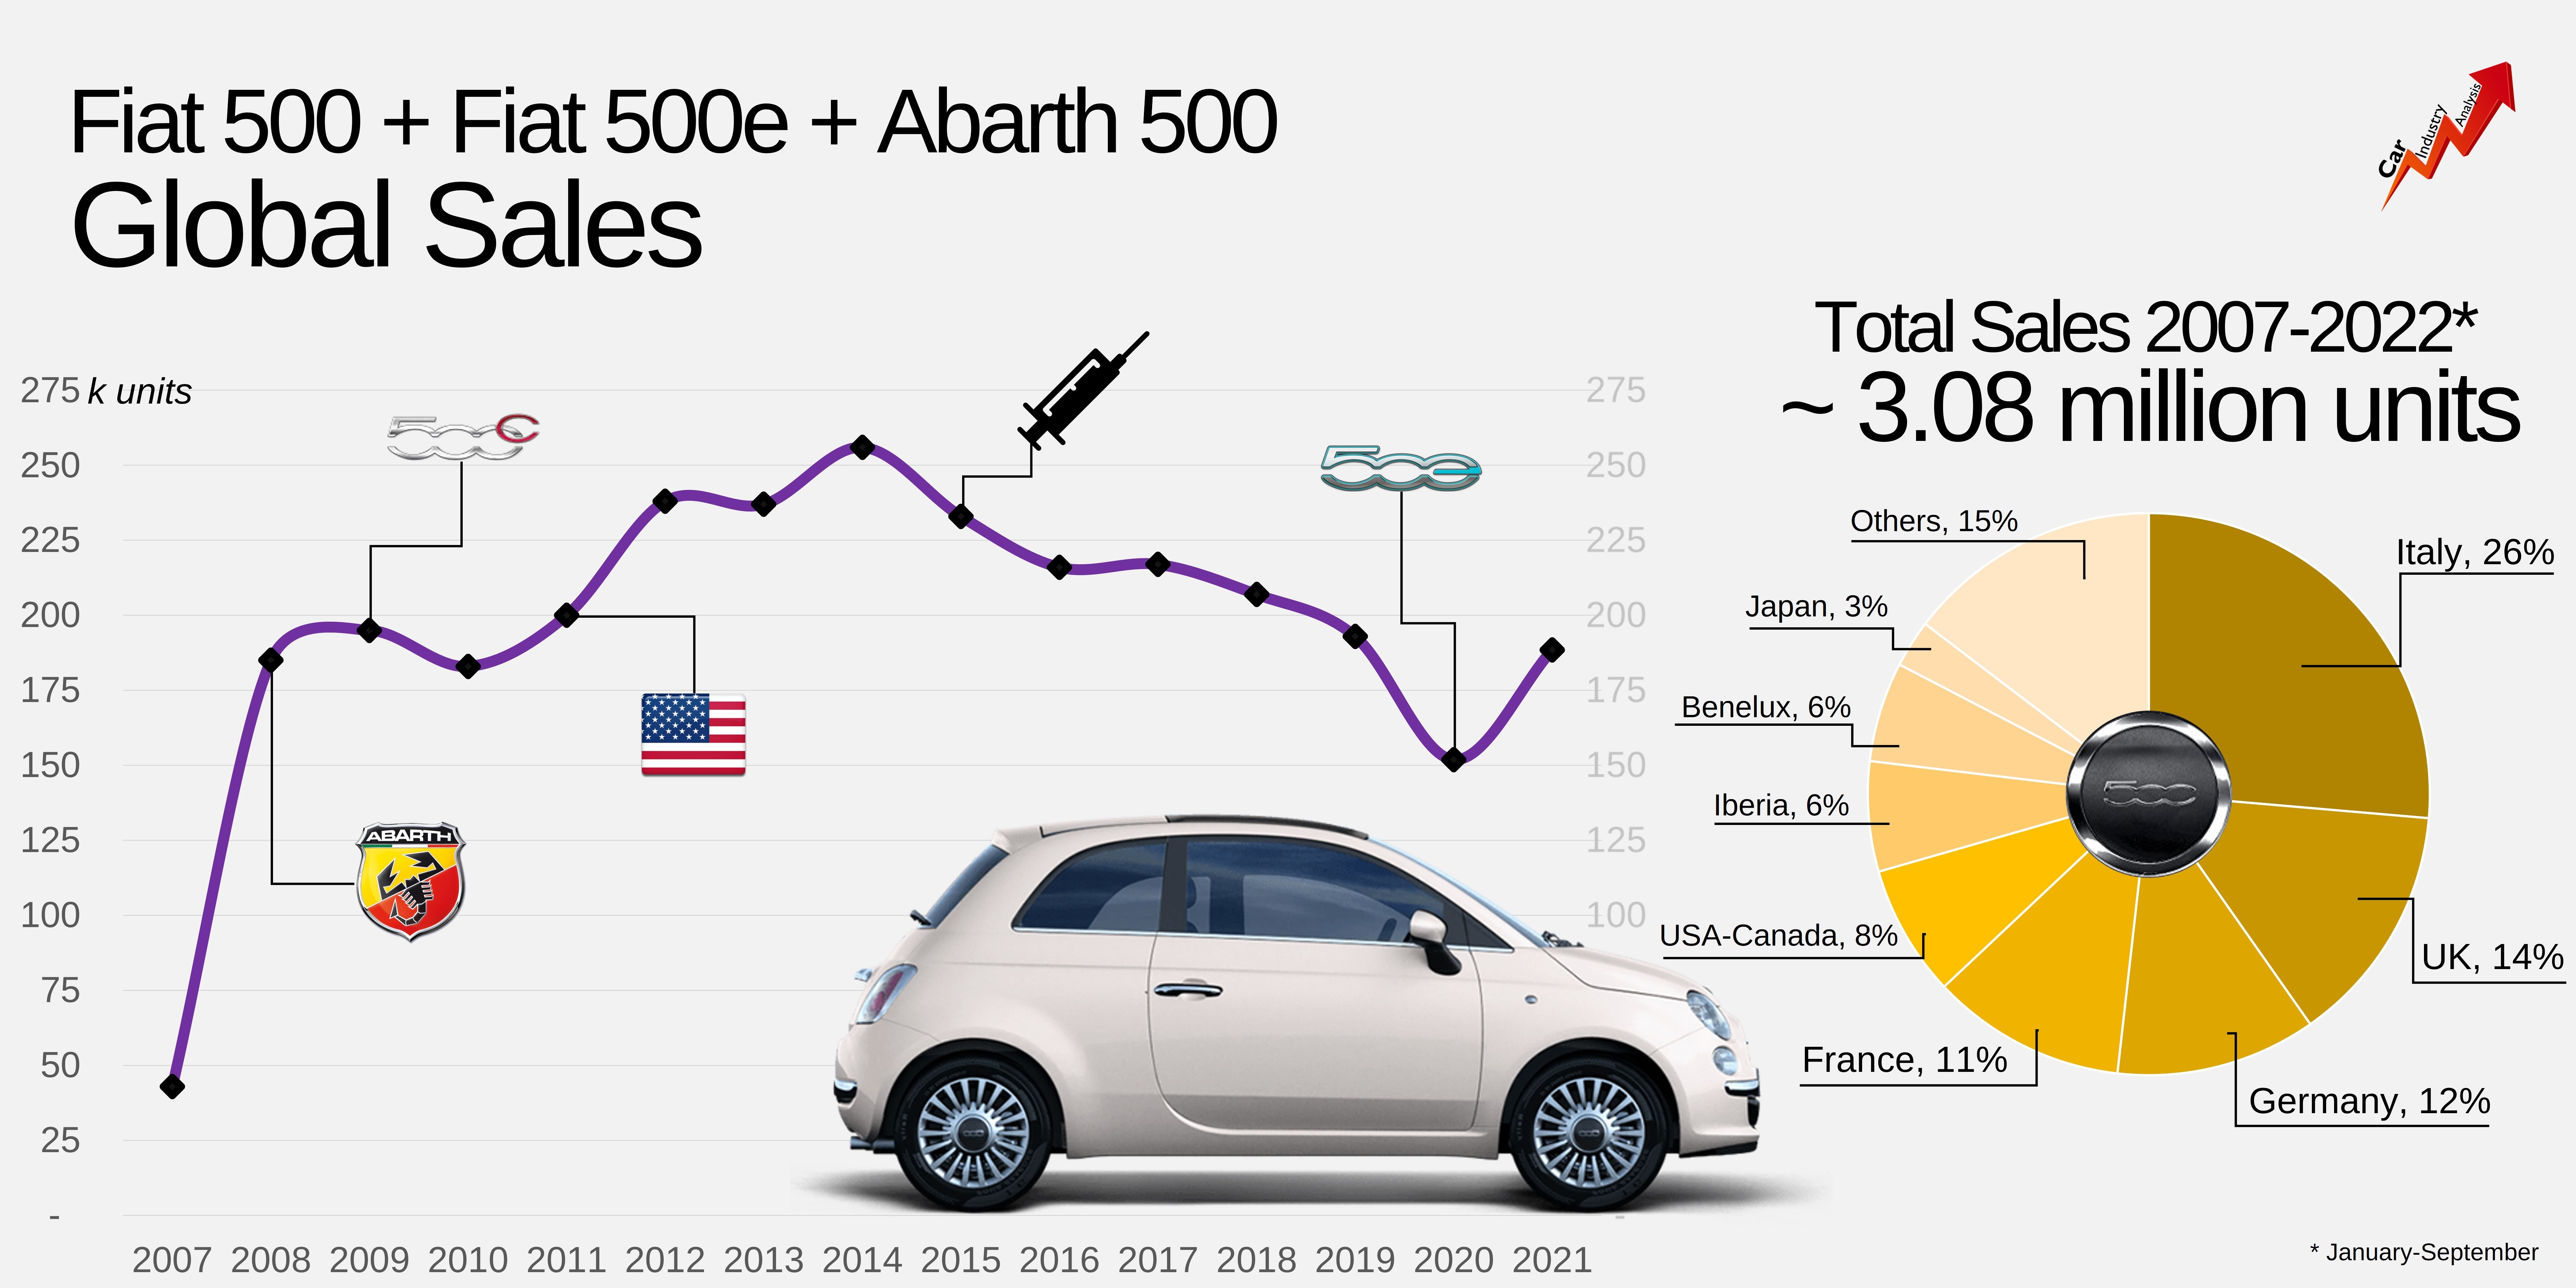 Demand for Fiat 500 Abarth outstripping supply